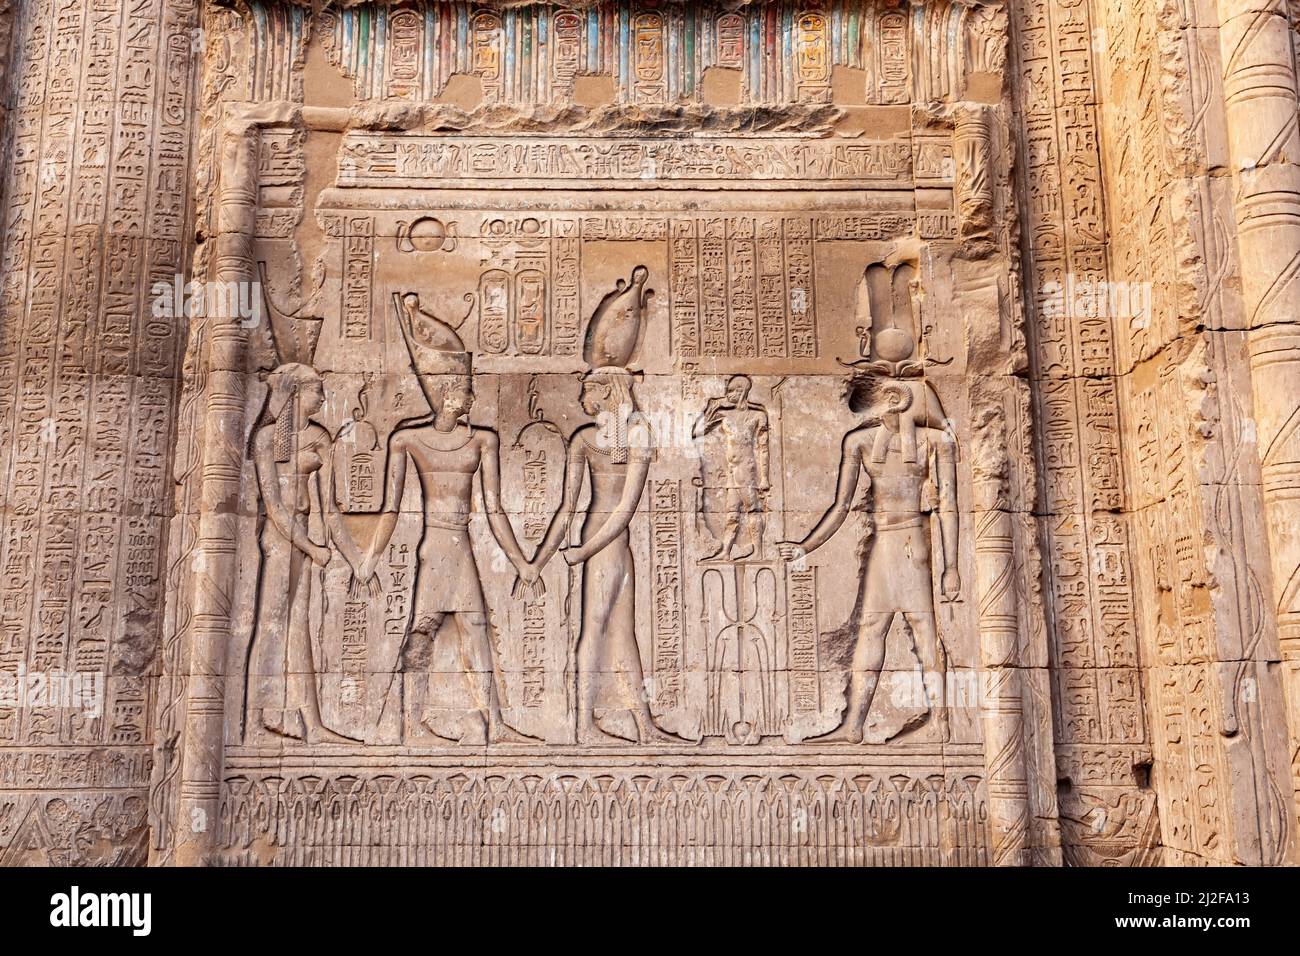 Wall relief at the Temple of Khnum (The Ram Headed Egyptian God) in Esna, Upper Egypt. Stock Photo